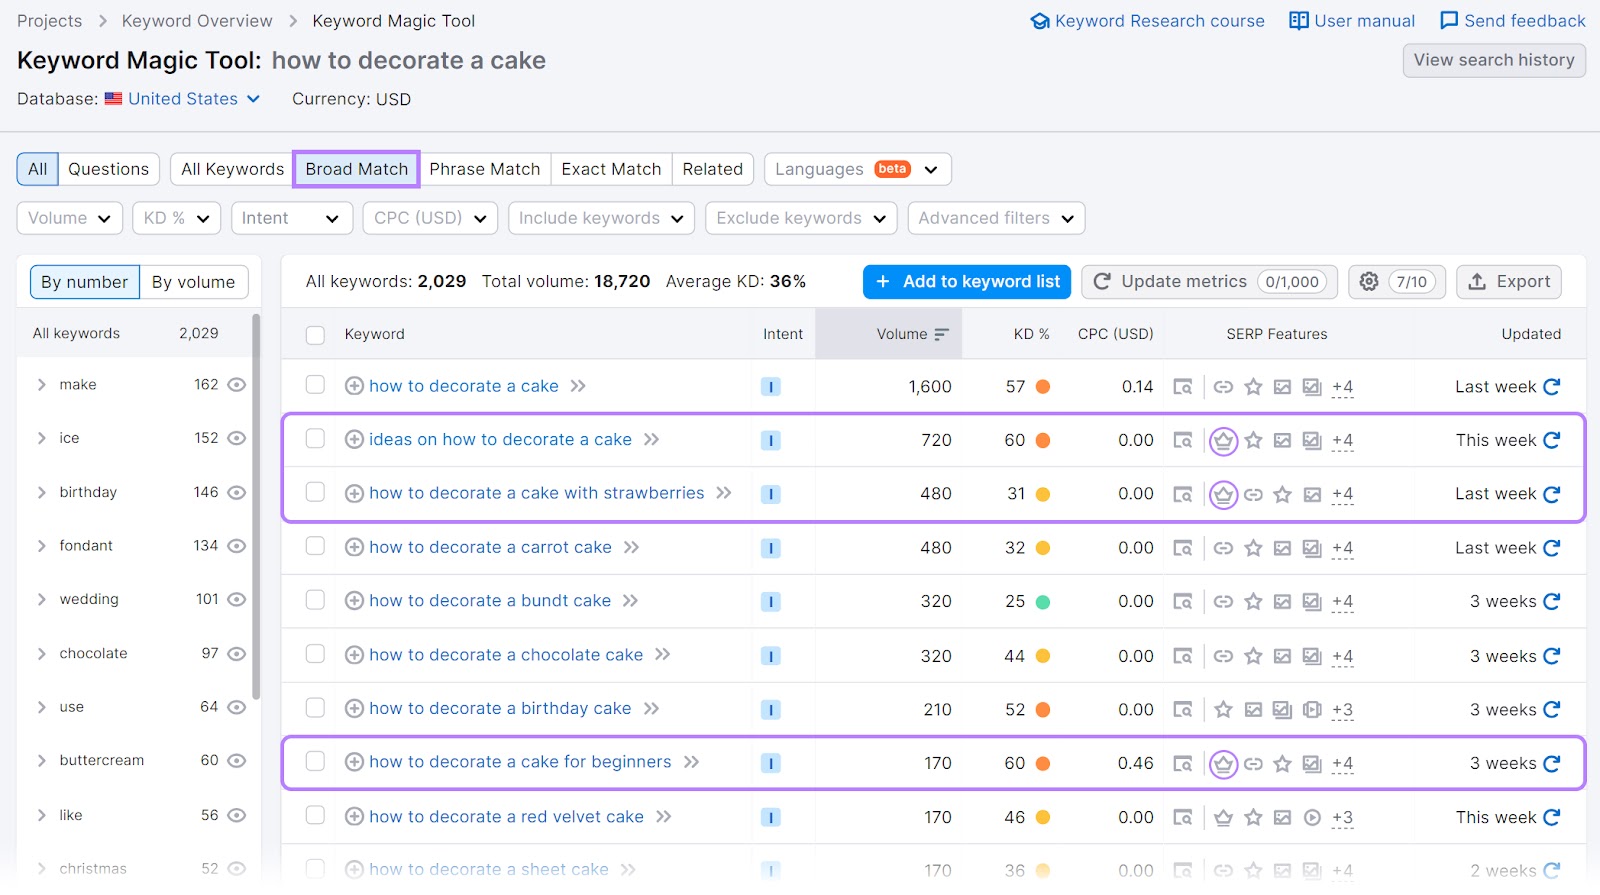 Keyword Magic Tool results for "how to decorate a cake"